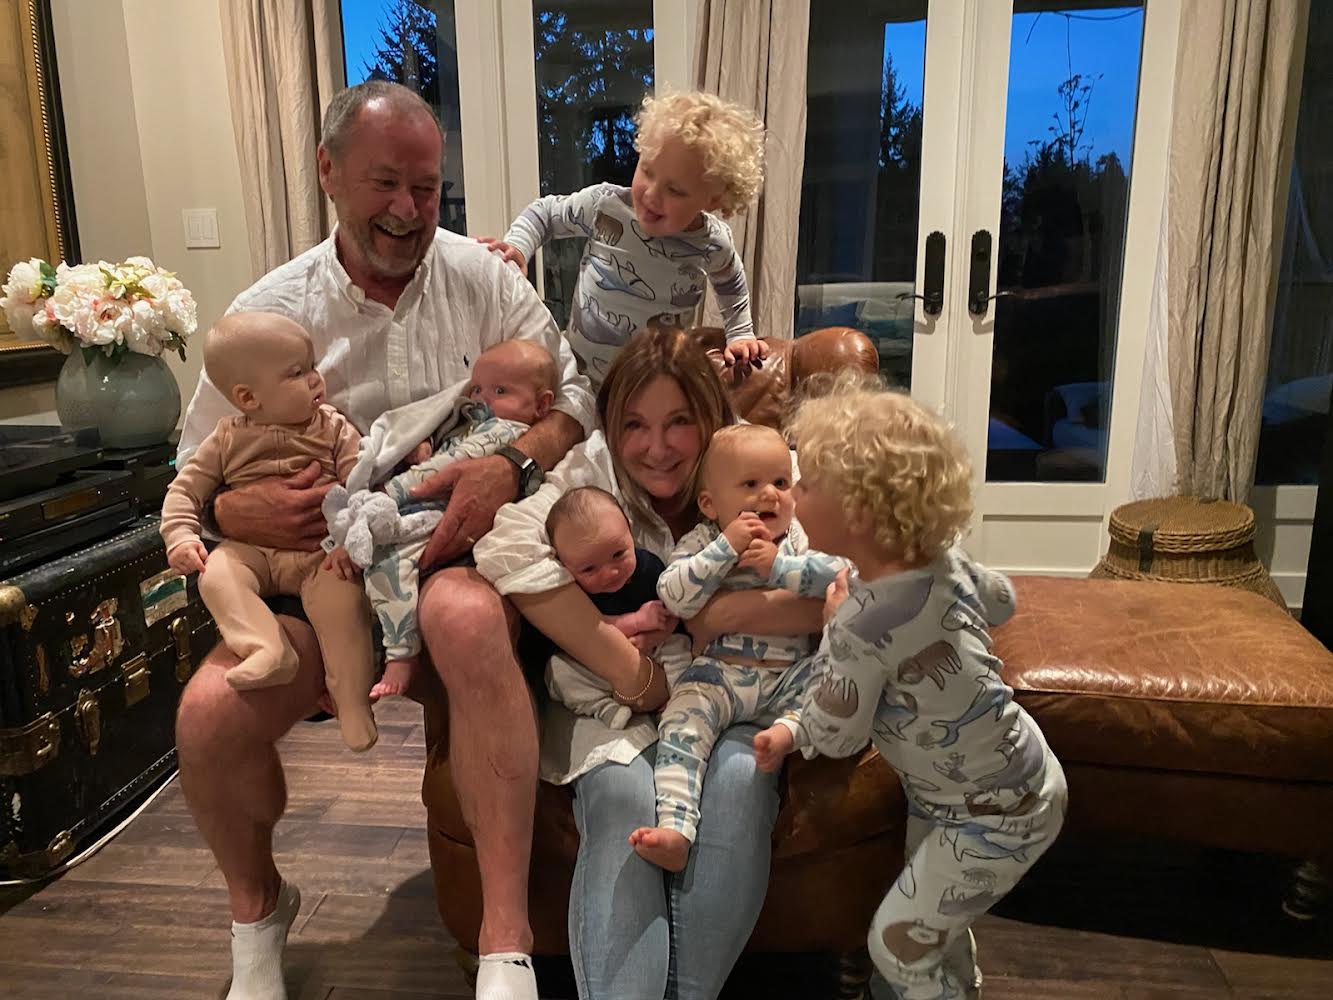 Don Hatton joyfully playing with his grandkids